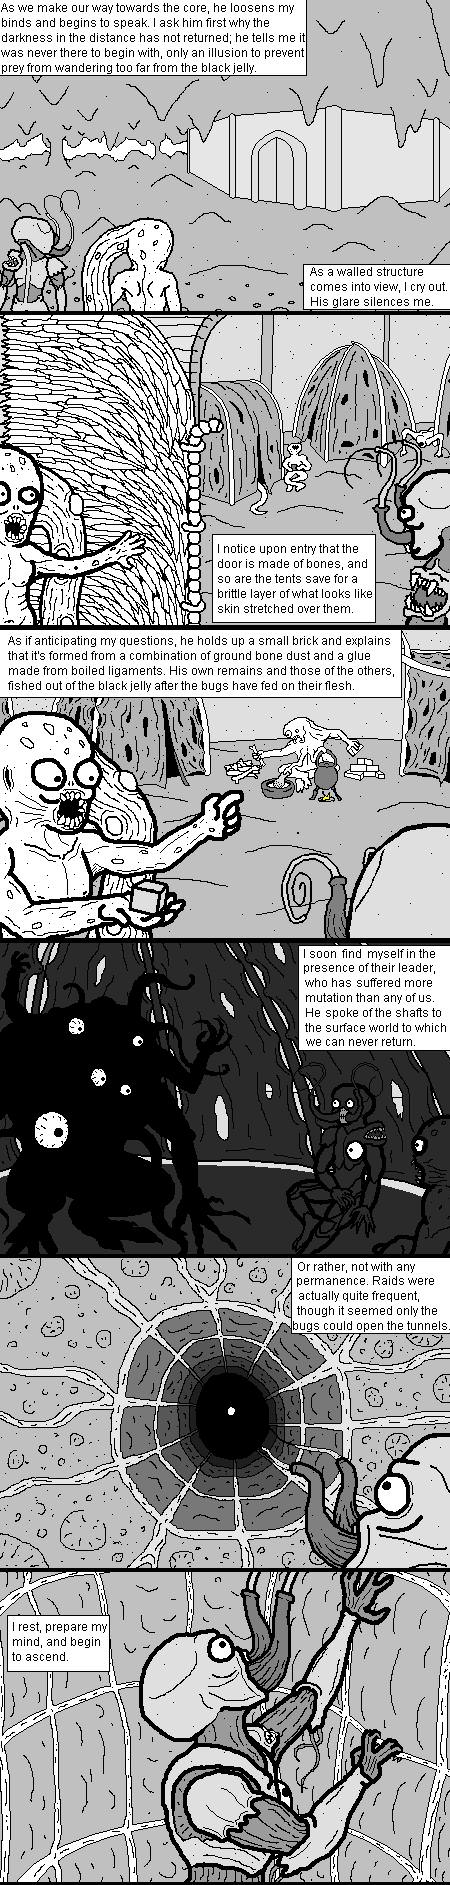 Enjoy A Creepy Comic That Will Mess With Your Mind To Celebrate Friday The 13th